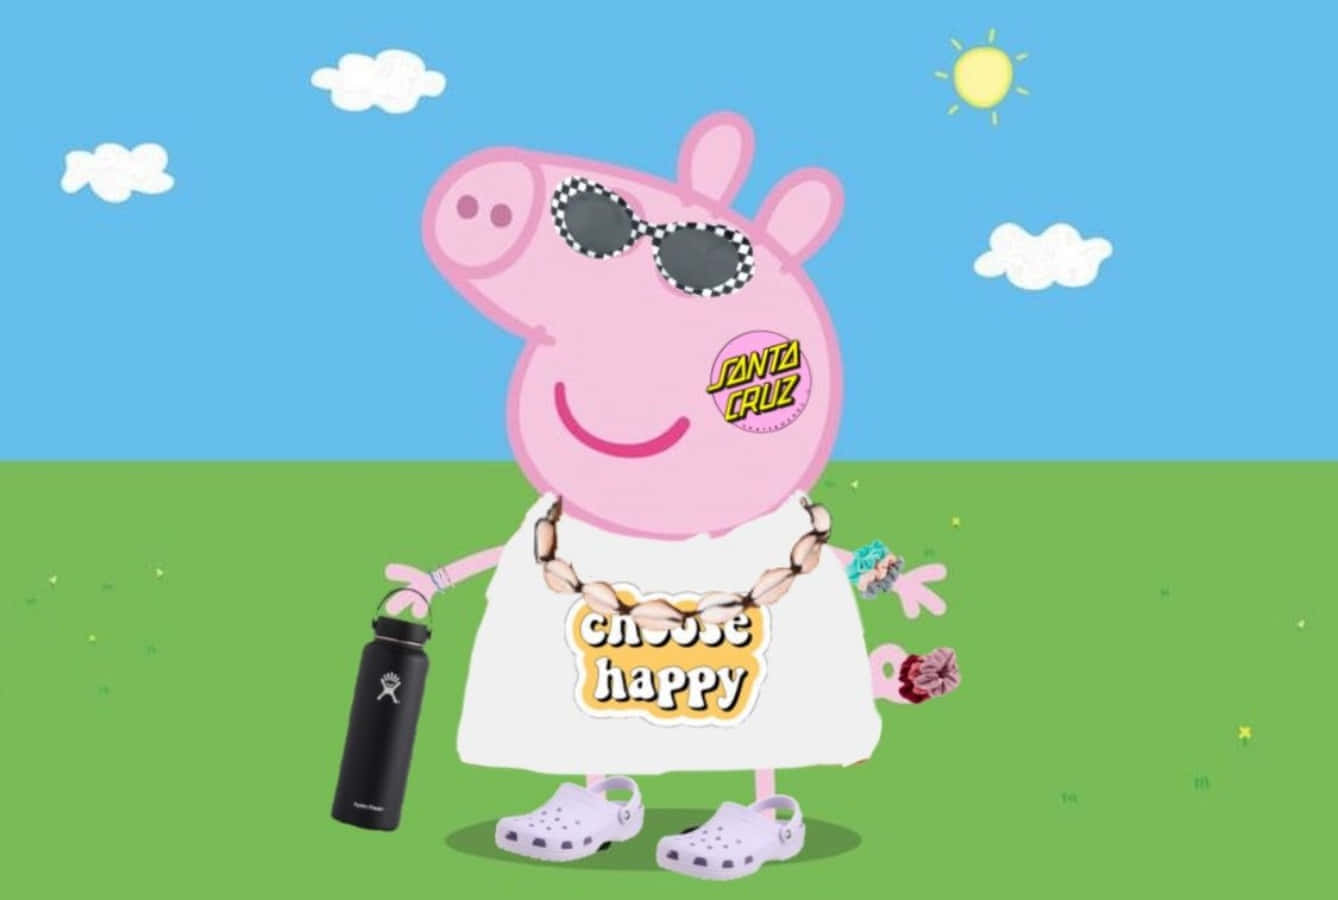 "Laughing it up with Peppa Pig!"